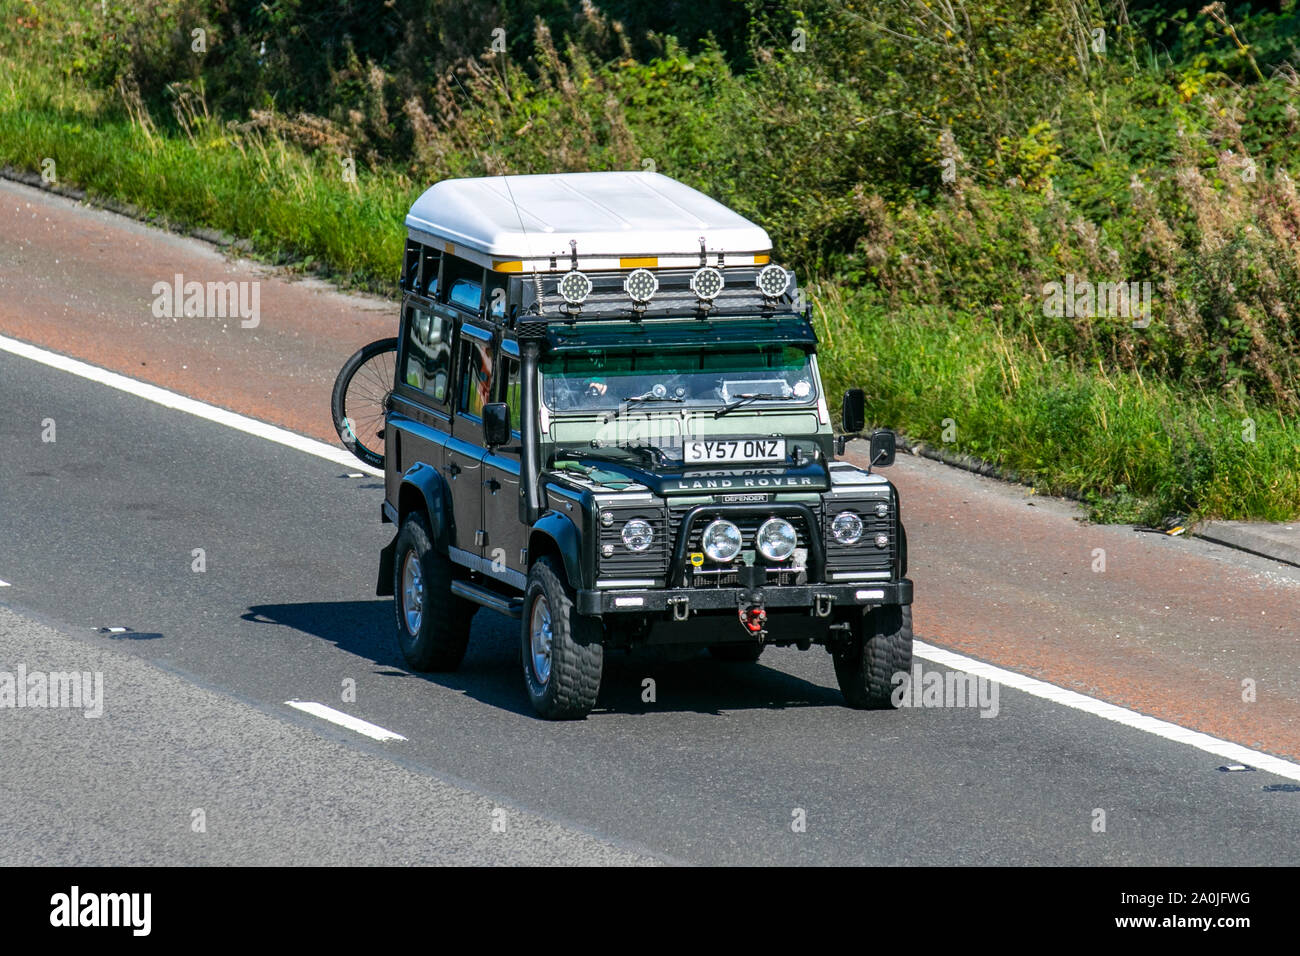 2007, green Land Rover Defender, with snorkel exhaust,  UK Vehicular traffic, transport, modern, vehicles, south-bound on the 3 lane M6 motorway highway. Stock Photo